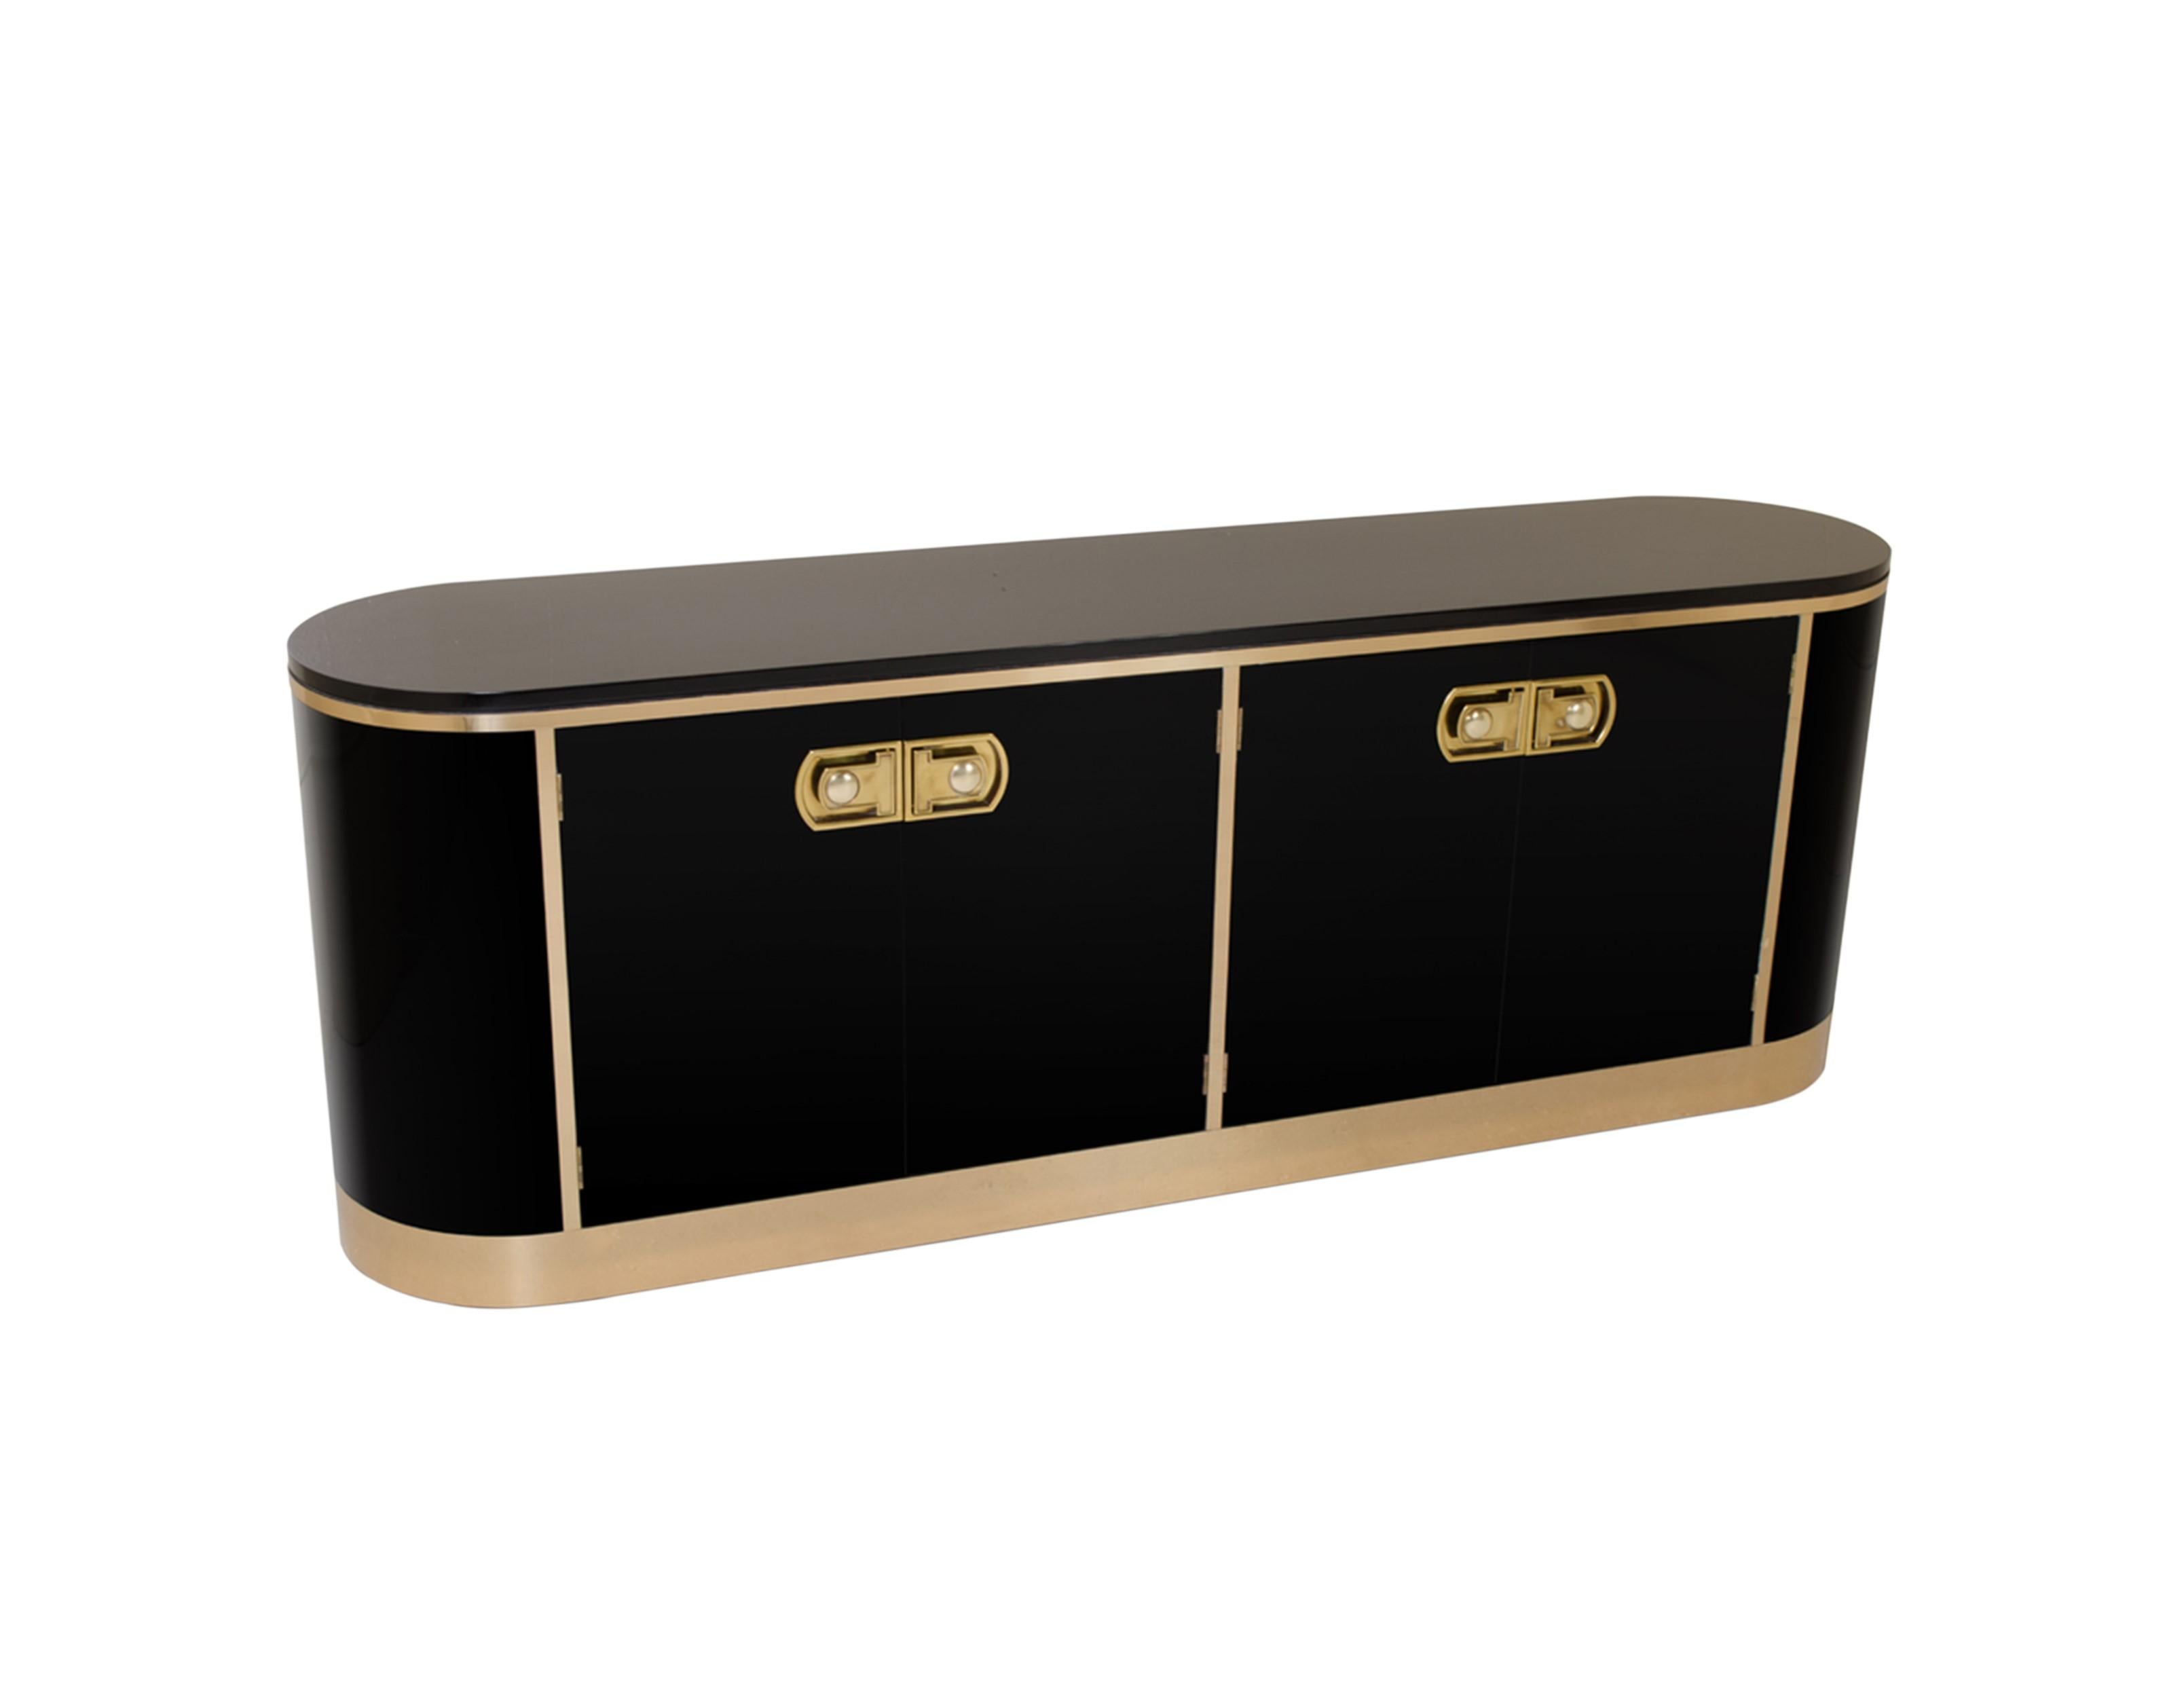 Mid-Century Modern Elegant Black Lacquer and Polished Brass Sideboard/Credenza by Mastercraft For Sale